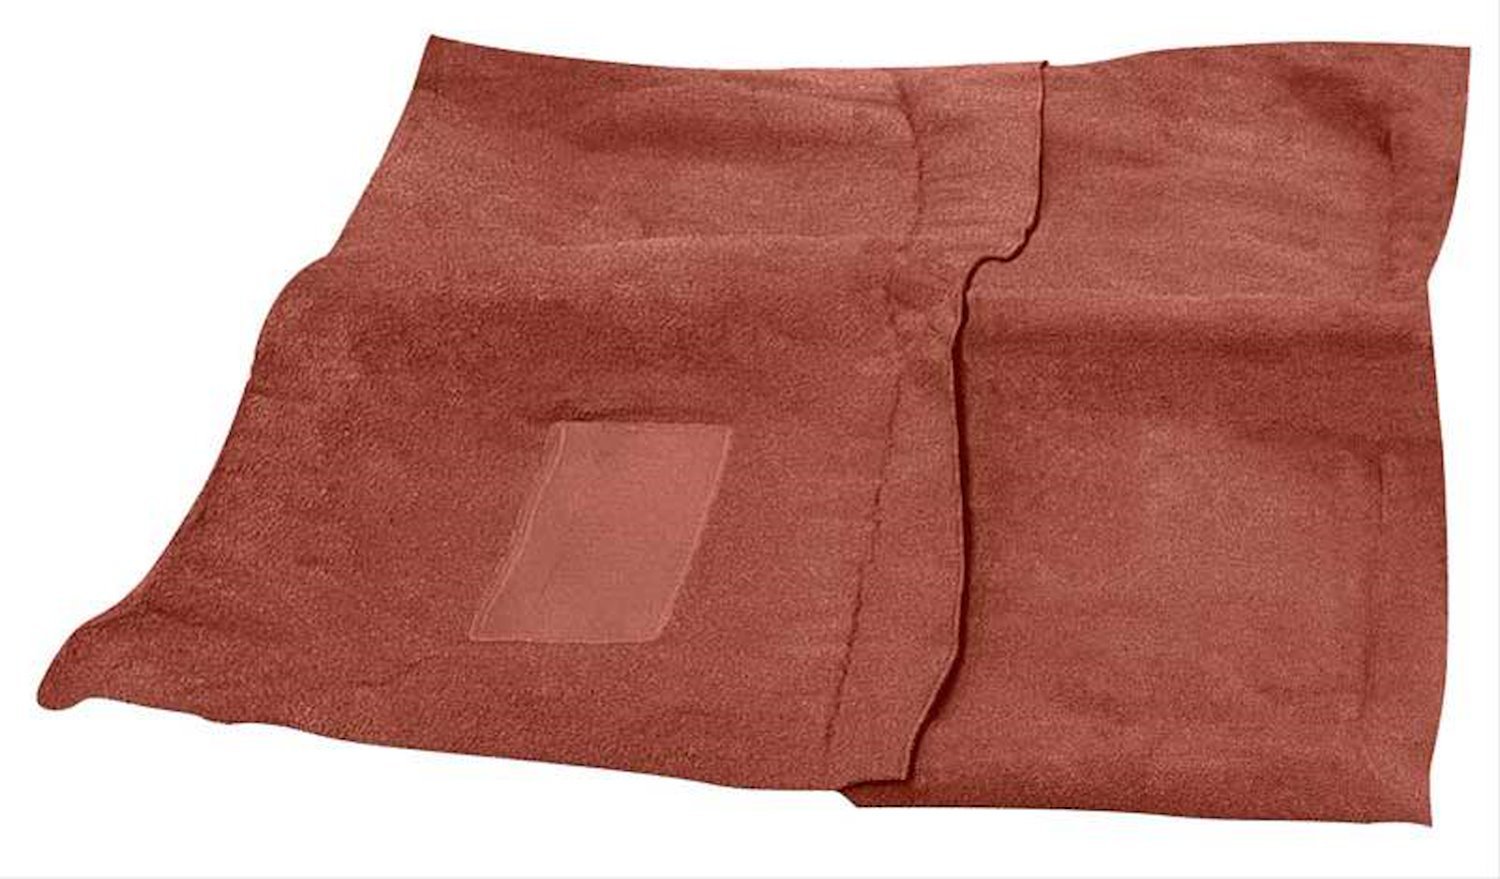 MA531521 Loop Carpet With Tails 1967-69 Dodge Dart Convertible With Auto Trans Burnt Orange